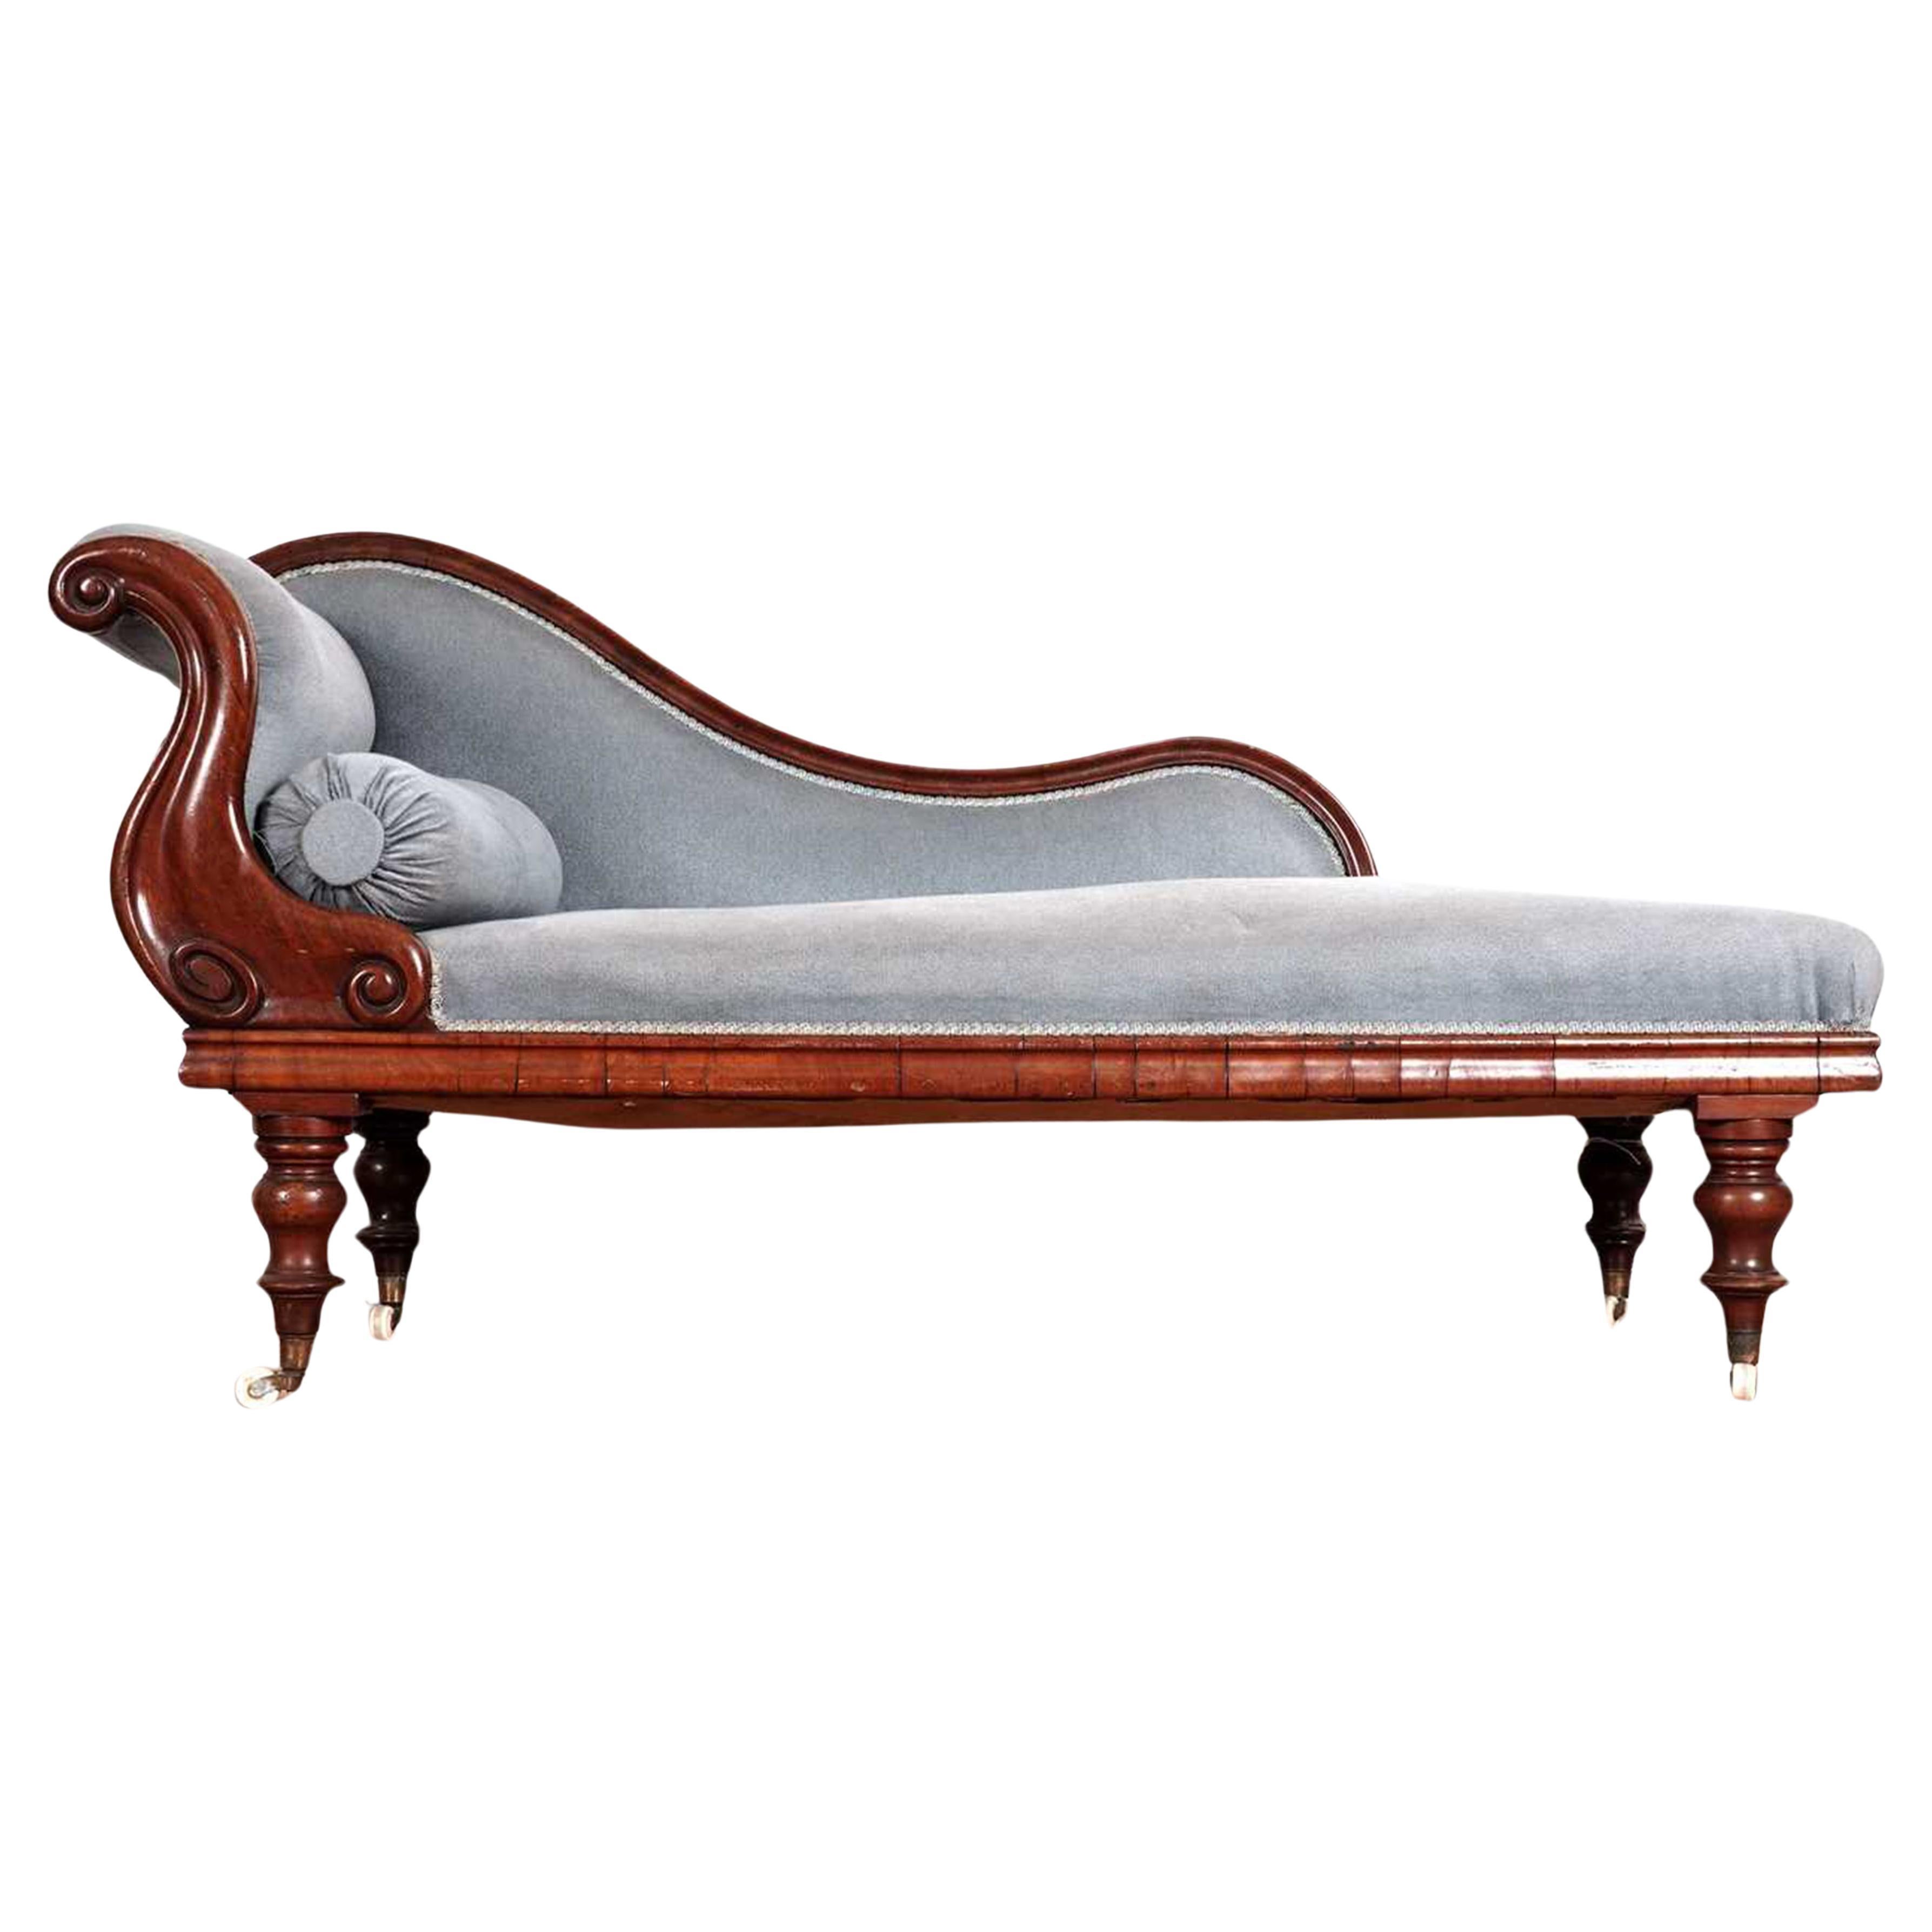 19th Century A Victorian Mahogany Swan Back Chaise Longue Upholstered in a Blue Velvet Fabric For Sale